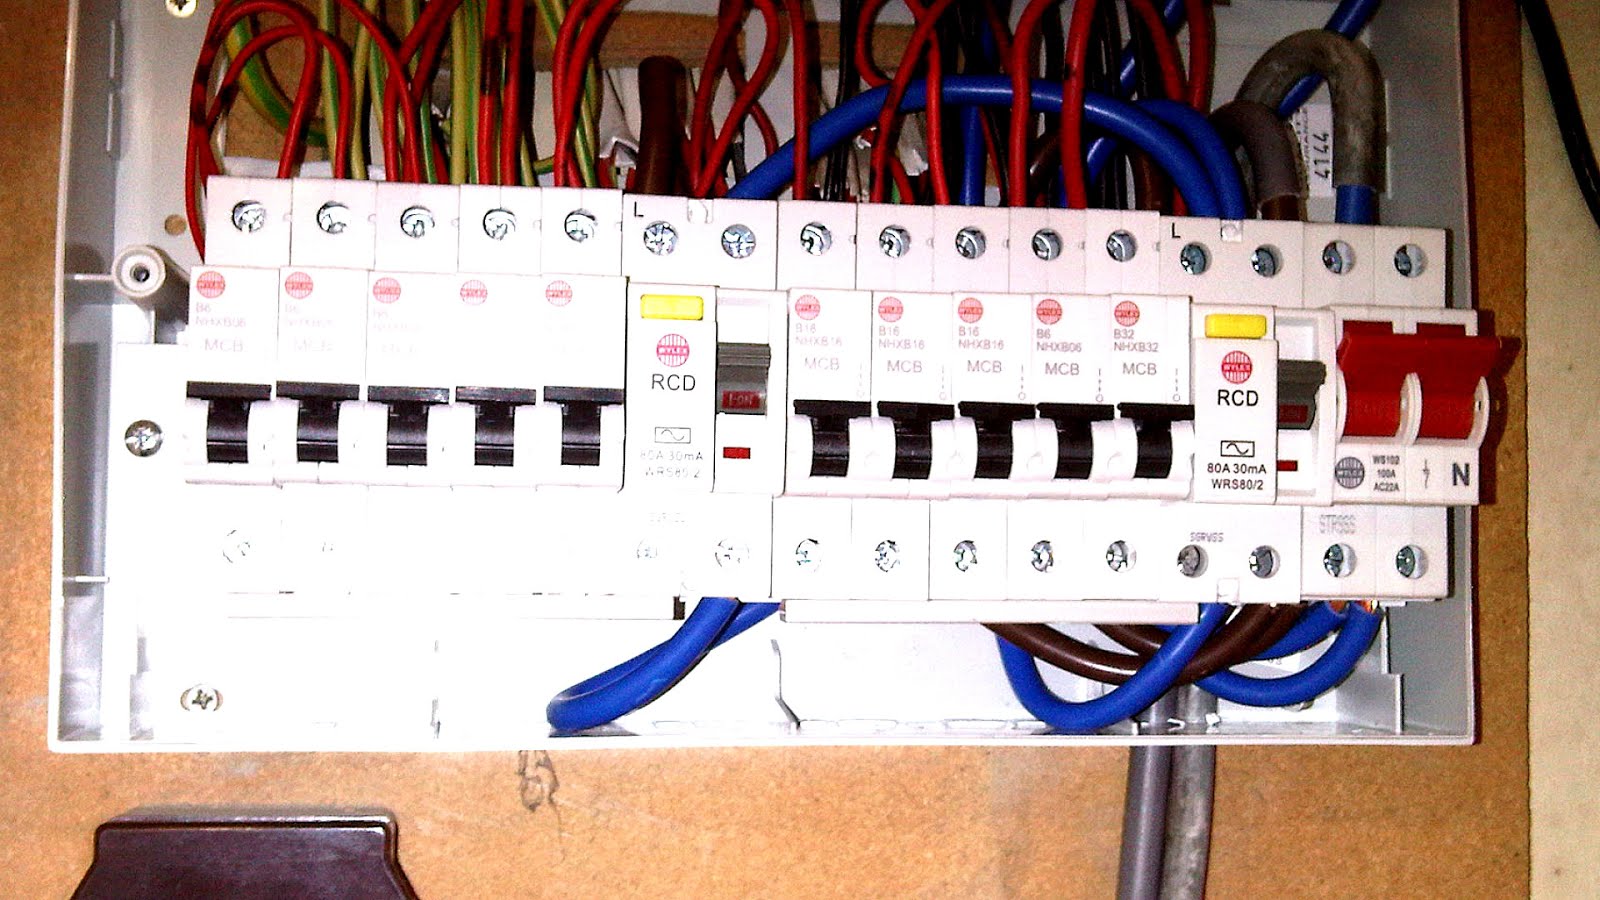 trip switch for old fuse box